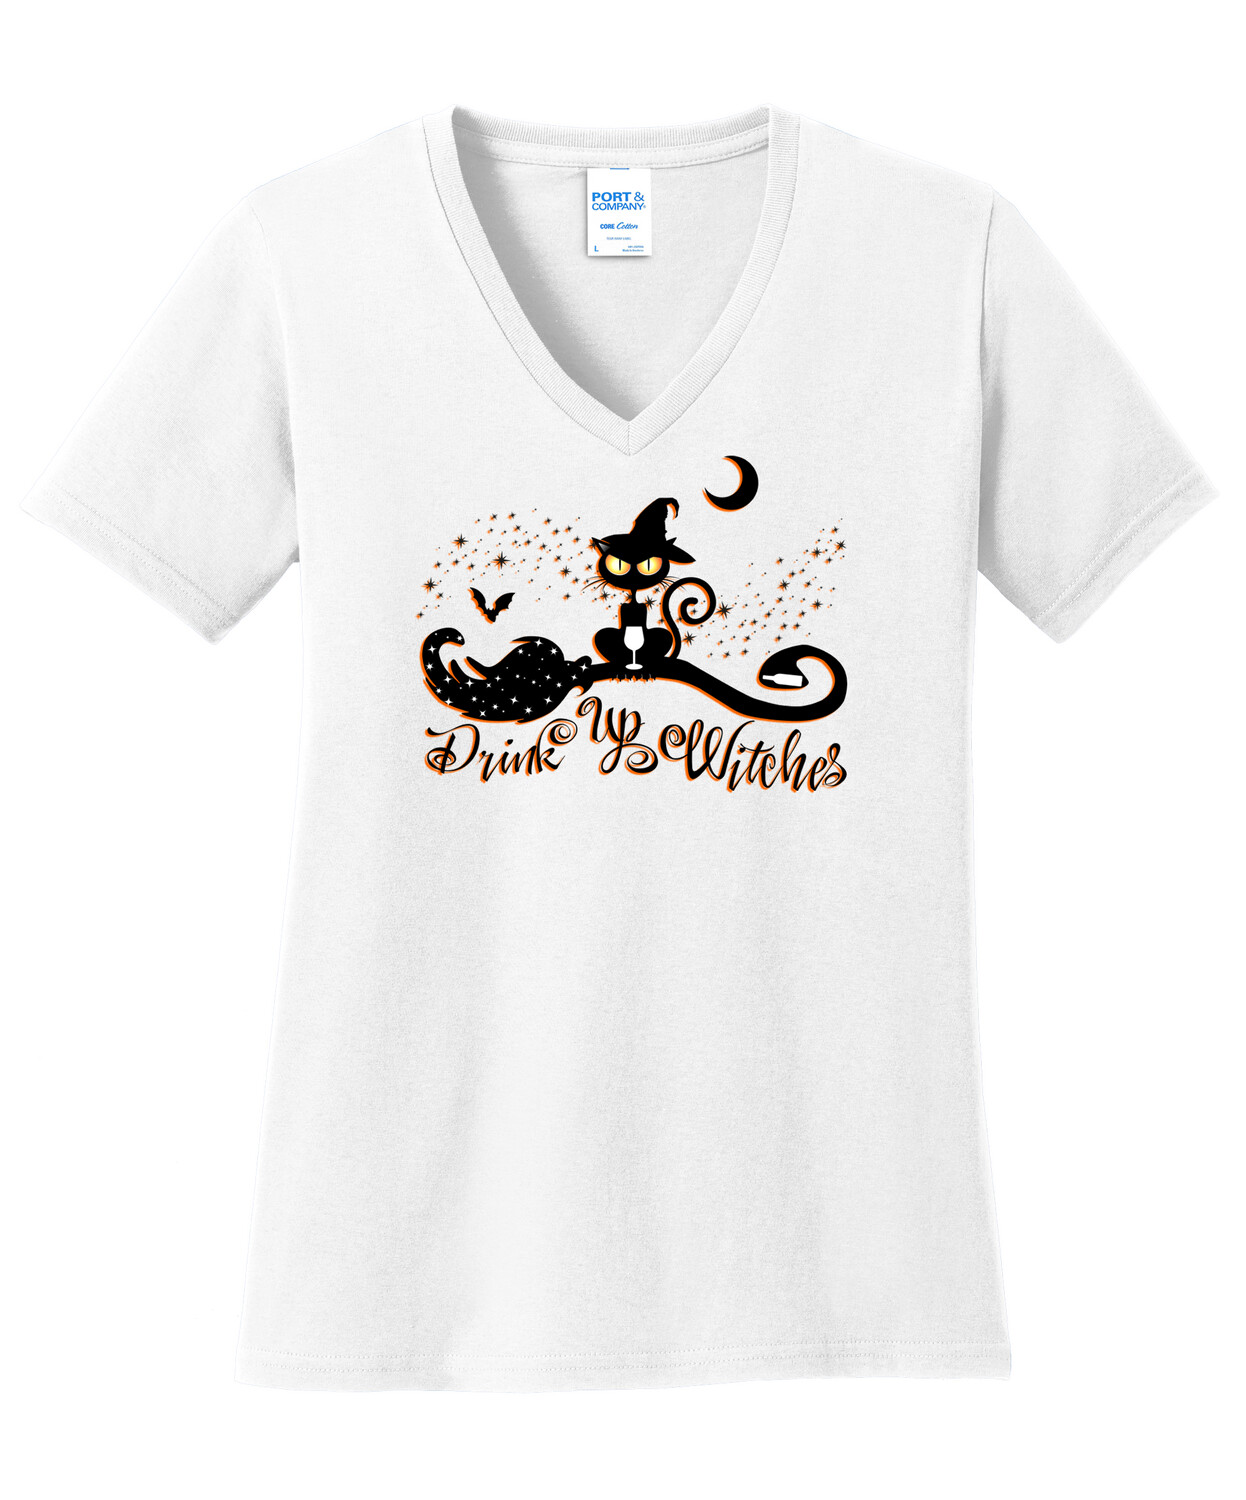 DRINK UP WITCHES LADIES V NECK TEE